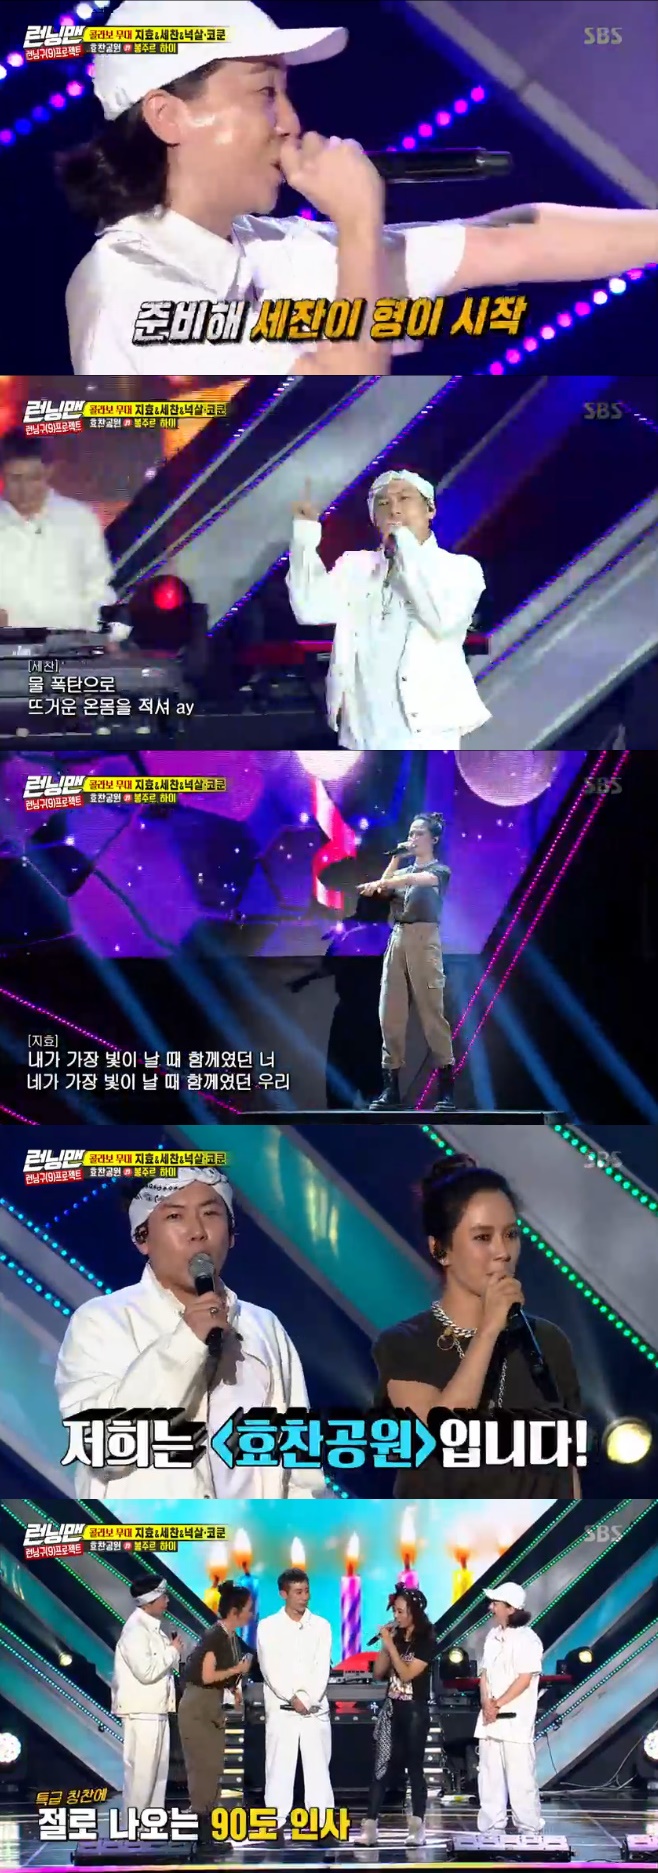 Yoon Mi-rae appeared on the Collabo stage of Running Man Song Ji-hyo, Yang Se-chan, Noxal and Code Kunst.On the 22nd, SBS entertainment program Running Man, the fan meeting Collabo stage with various artists was released after last week.The hip-hop stage of the Song Ji-hyo X Yang Se-chan X Noxal & Code Kunst team was unveiled on the day.Yang Se-chan showed off his lap comfortably, and Song Ji-hyo also finished the stage calmly with a sense of tension.Yoon Mi-rae also appeared as a surprise guest.After raising the atmosphere, when asked about his feelings, Yoon Mi-rae said, I wanted to be cool. I should have done better, but I am sorry.Yoon Mi-rae praised Song Ji-hyo, who turned into a rapper, for saying, It is so cool, the style of clothes is so good.